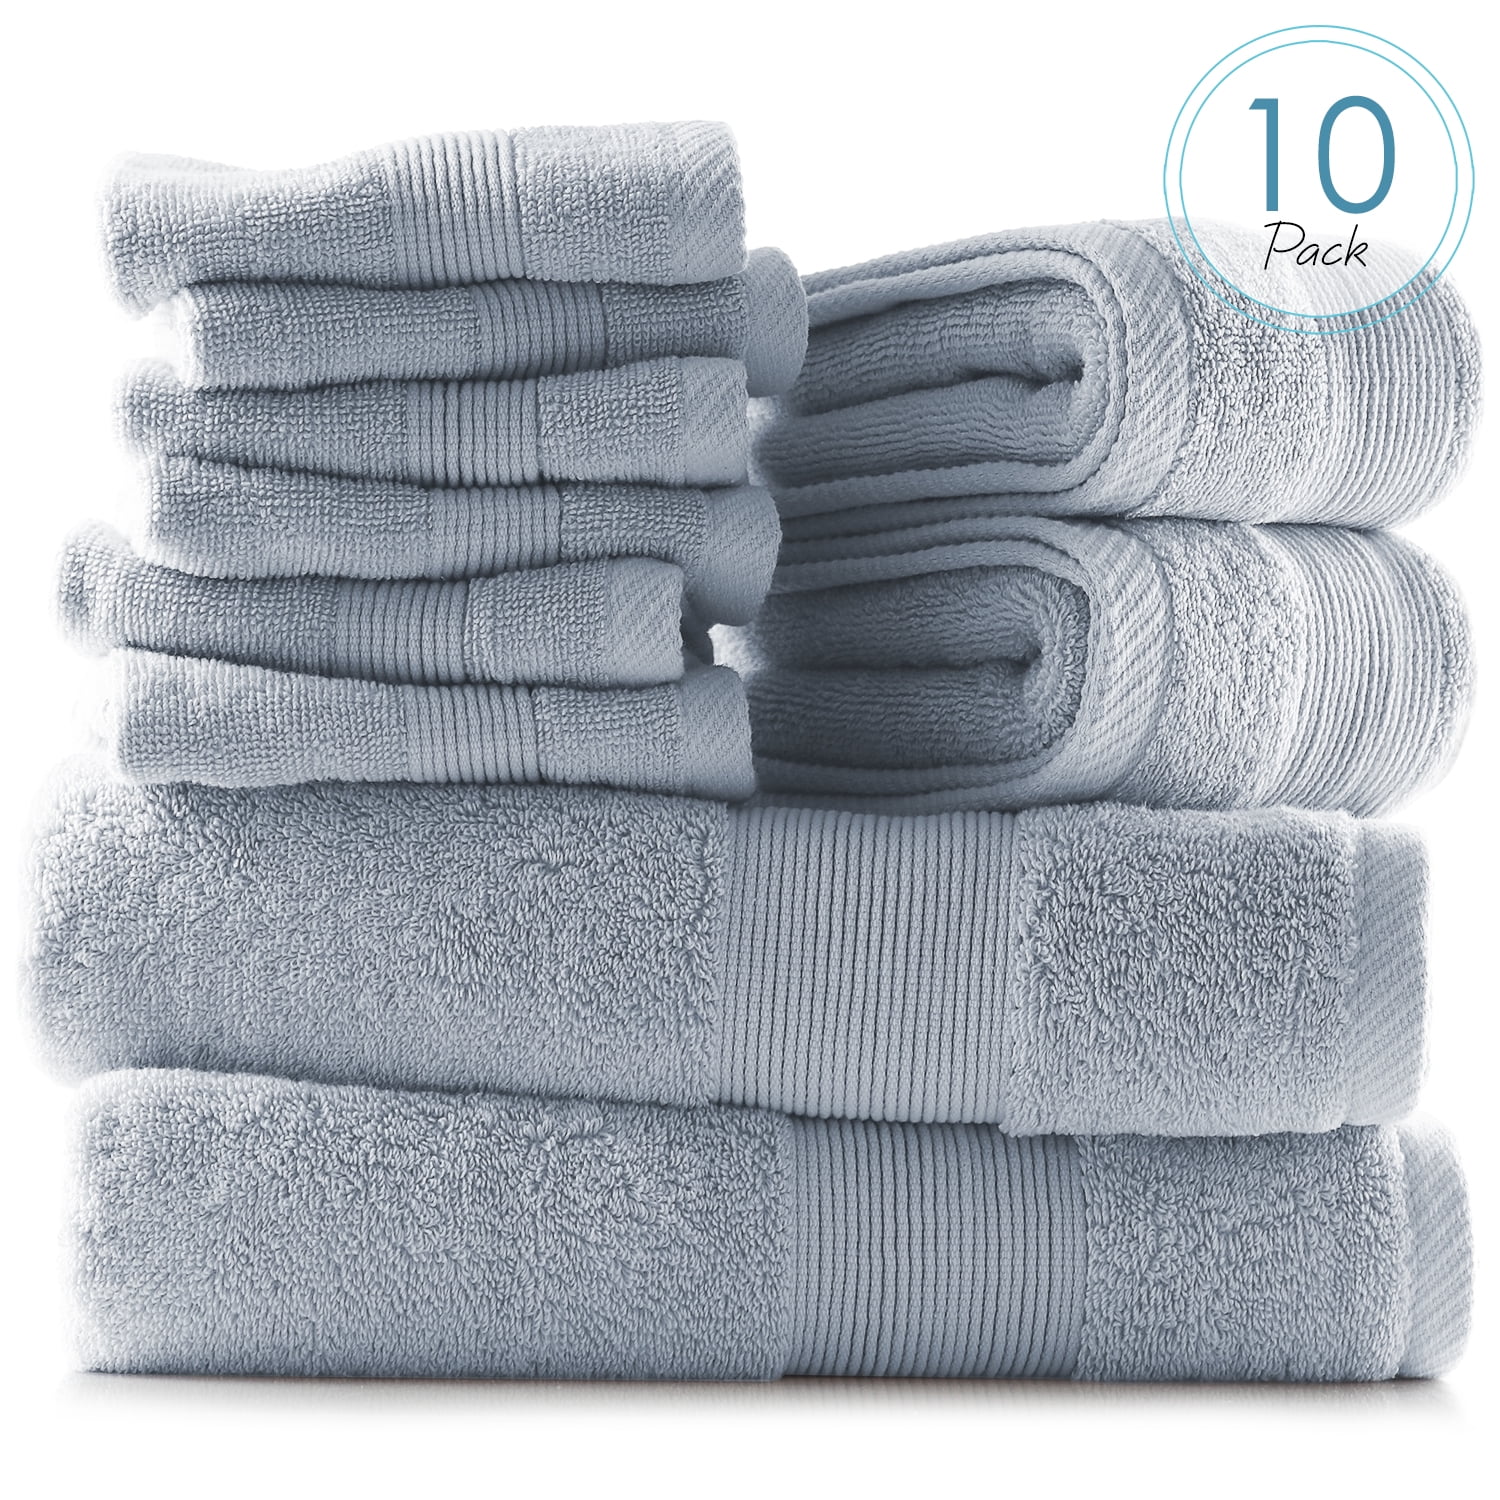 Hearth & Harbor Bath Towel Collection, 100% Cotton Luxury Soft 10 PC Set - Burgundy Red